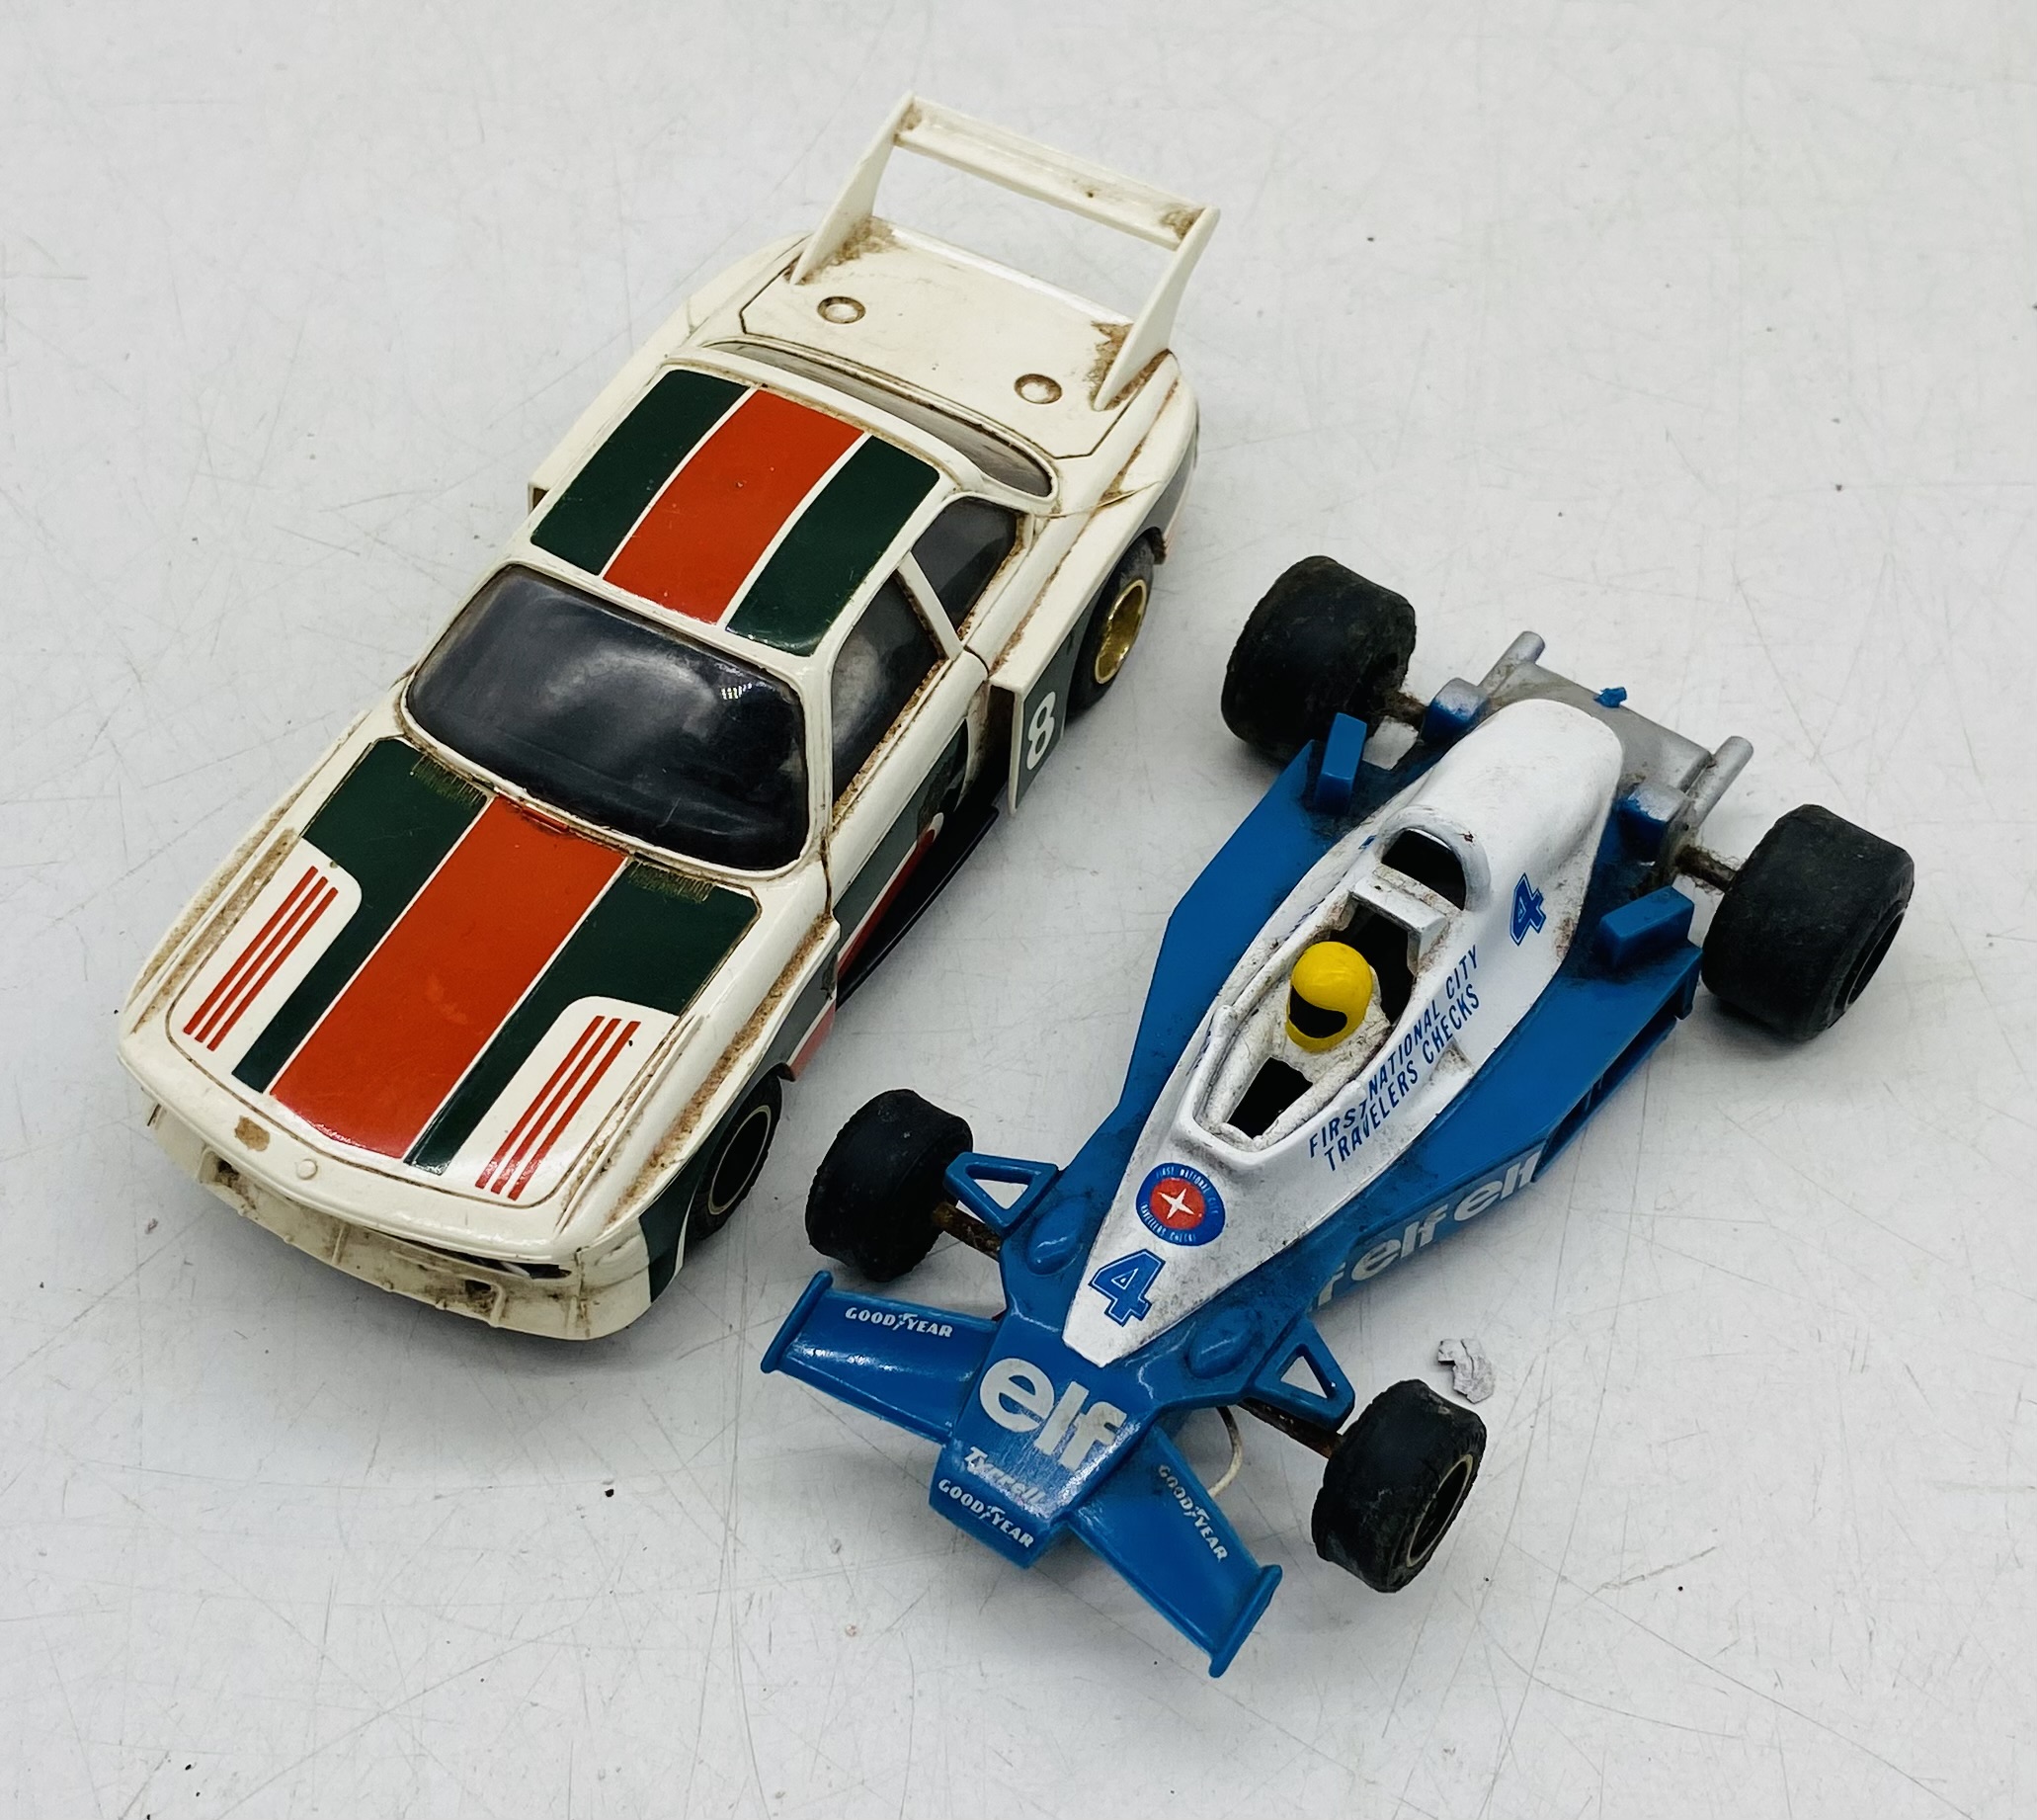 A large collection of loose vintage Scalextric including cars, controllers, track, buildings, - Image 4 of 6